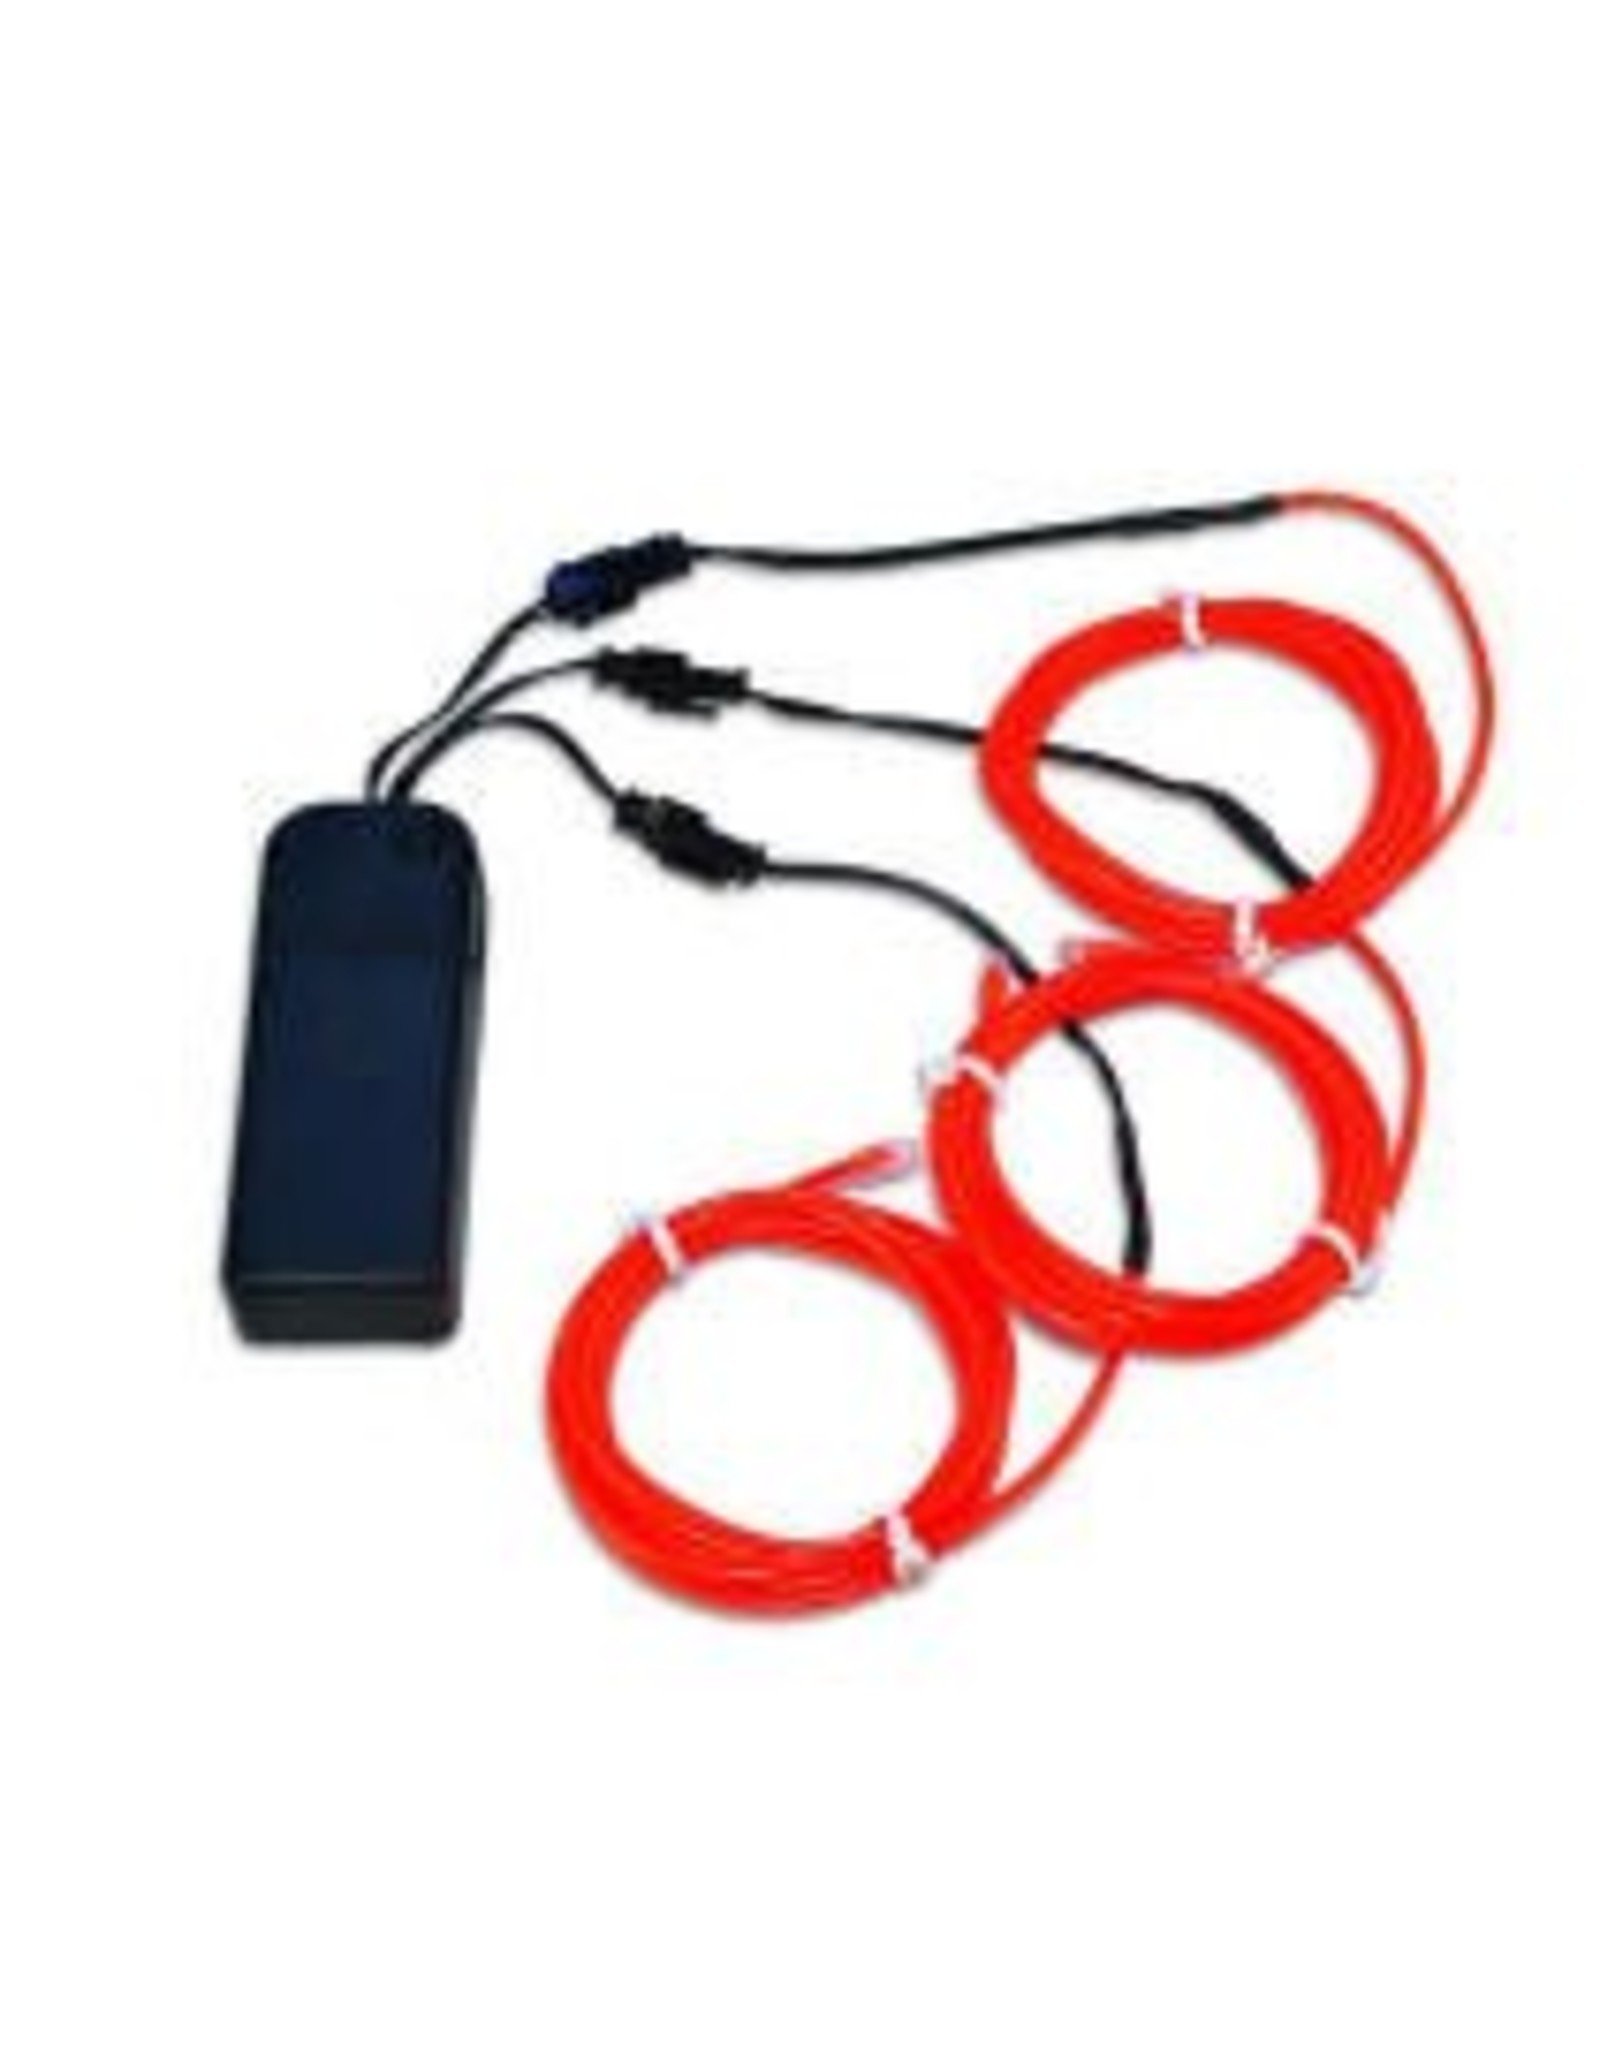 Electroluminescent Wires - Red